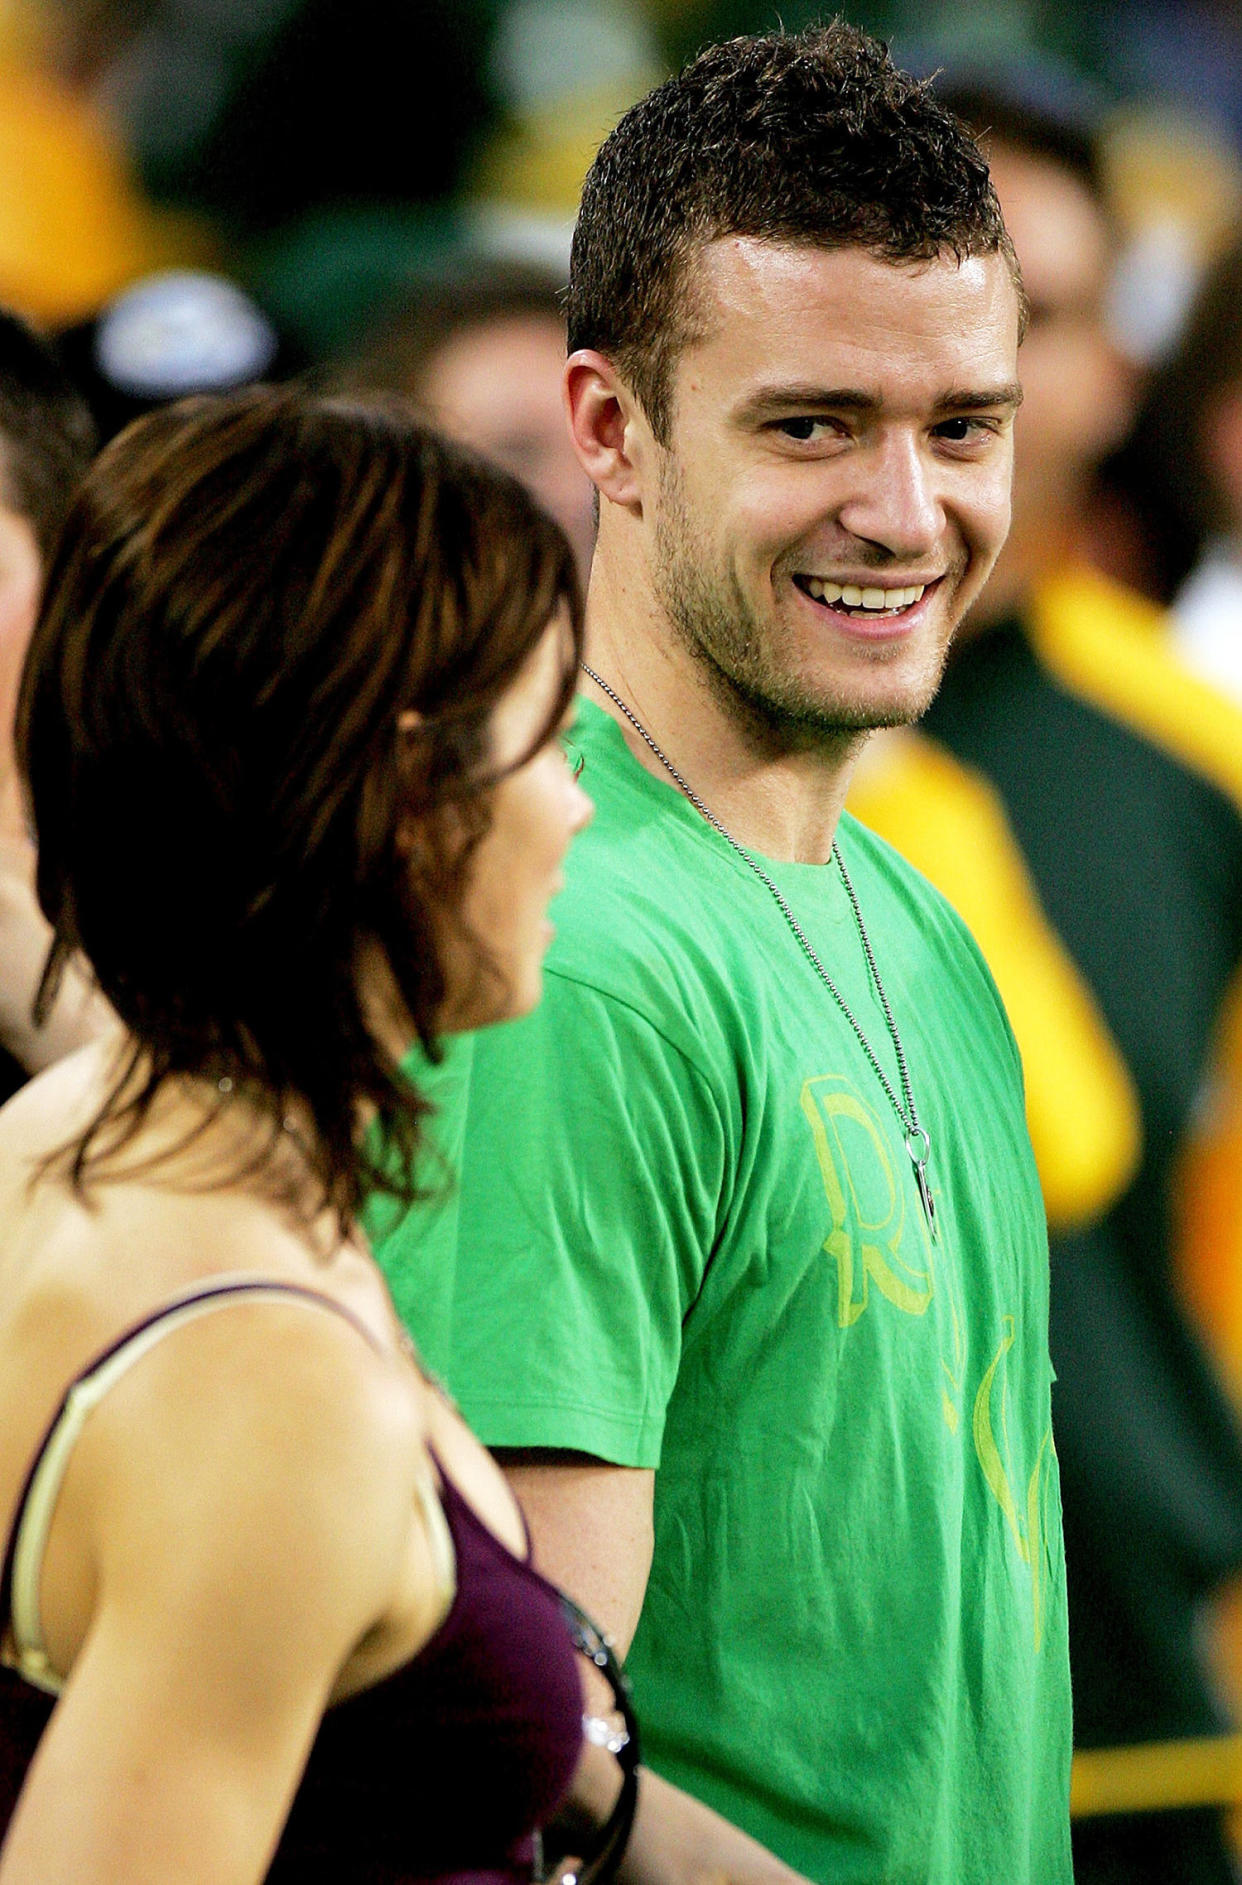 Jessica Biel and Justin Timberlake at a 2007 Green Bay Packers game (Matthew Stockman / Getty Images)